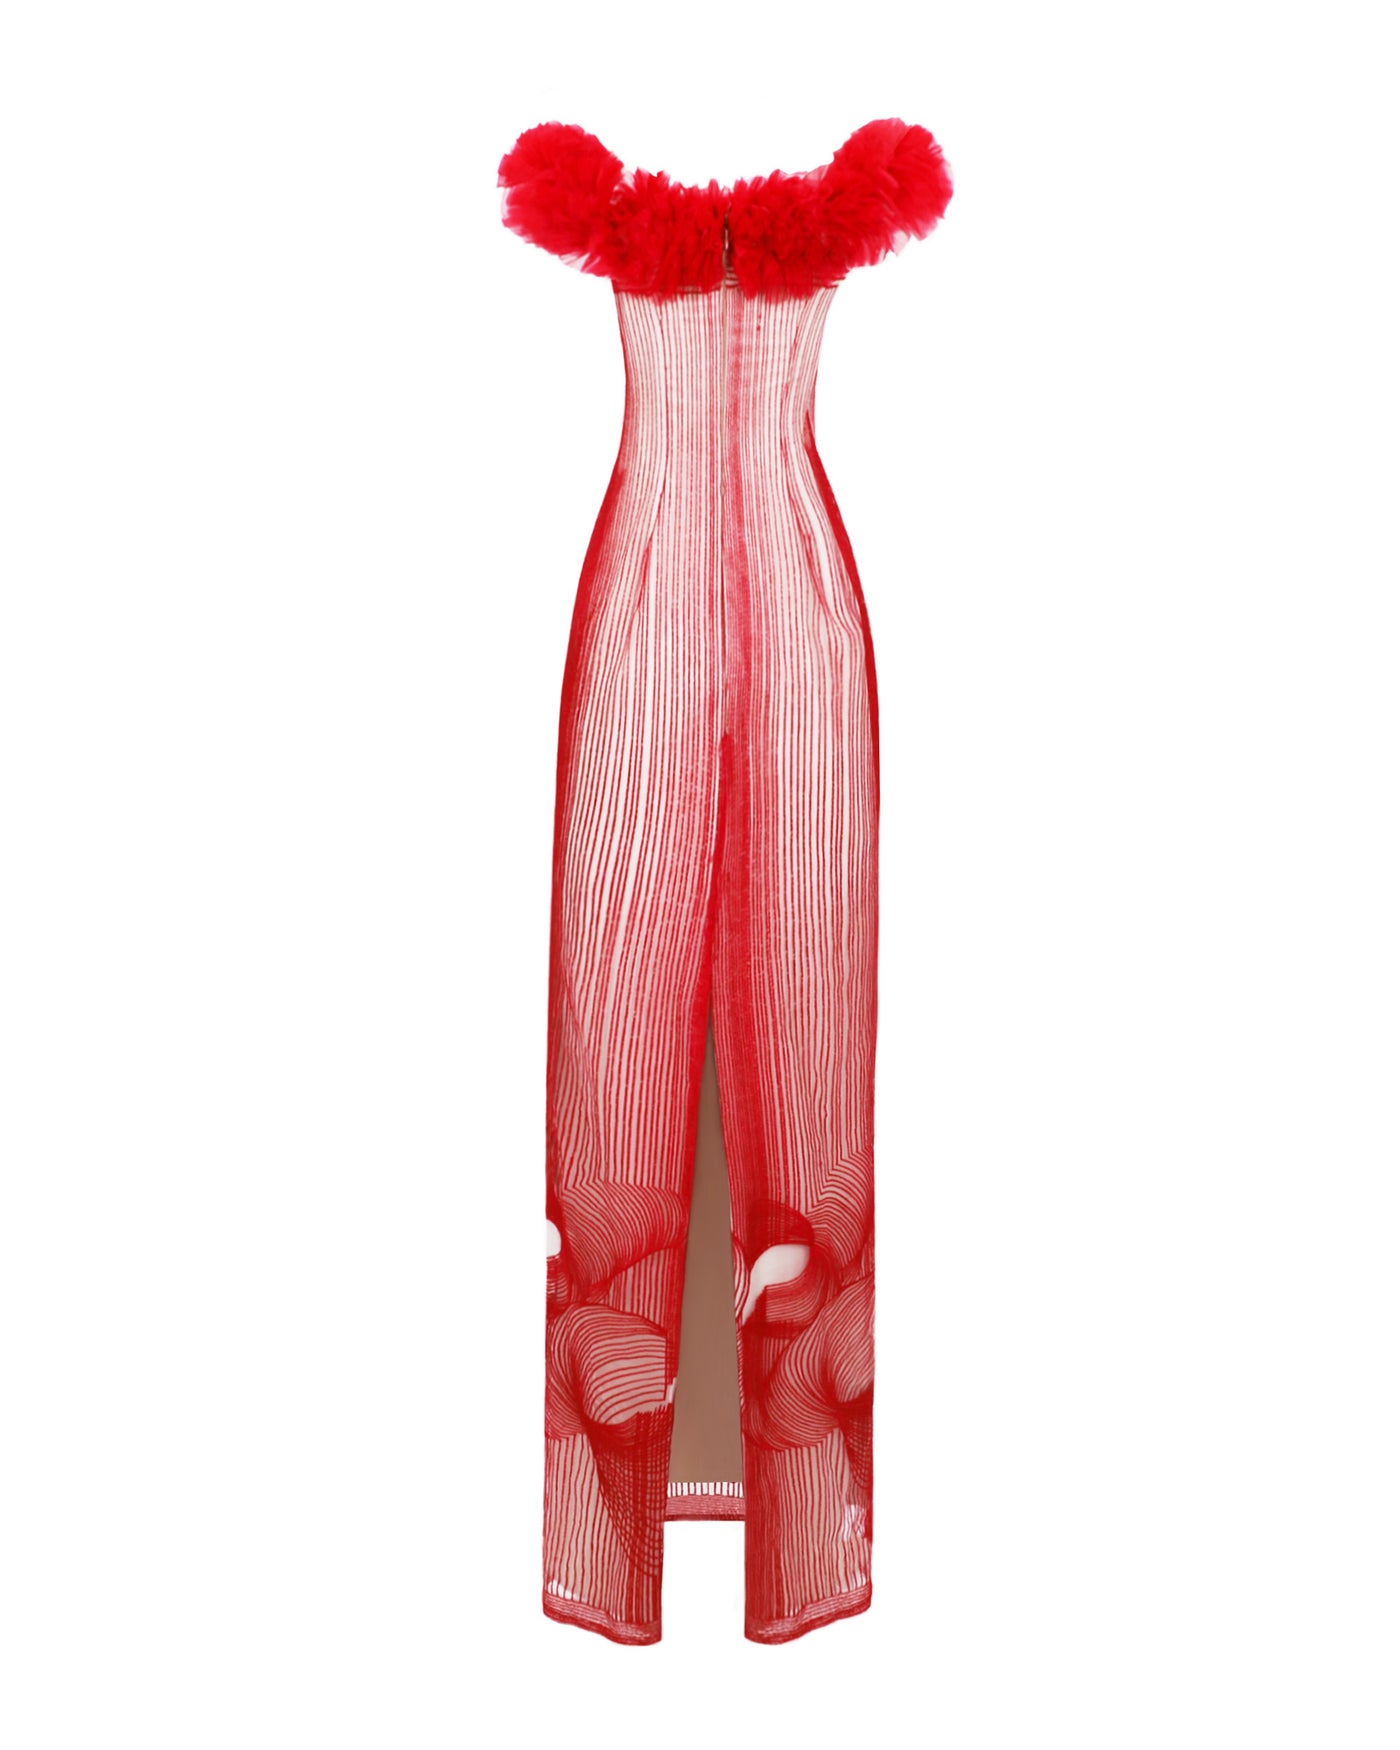 The back of an off-the-shoulders slim-cut red evening dress with rushed organza on the neckline and an open slit at the back.